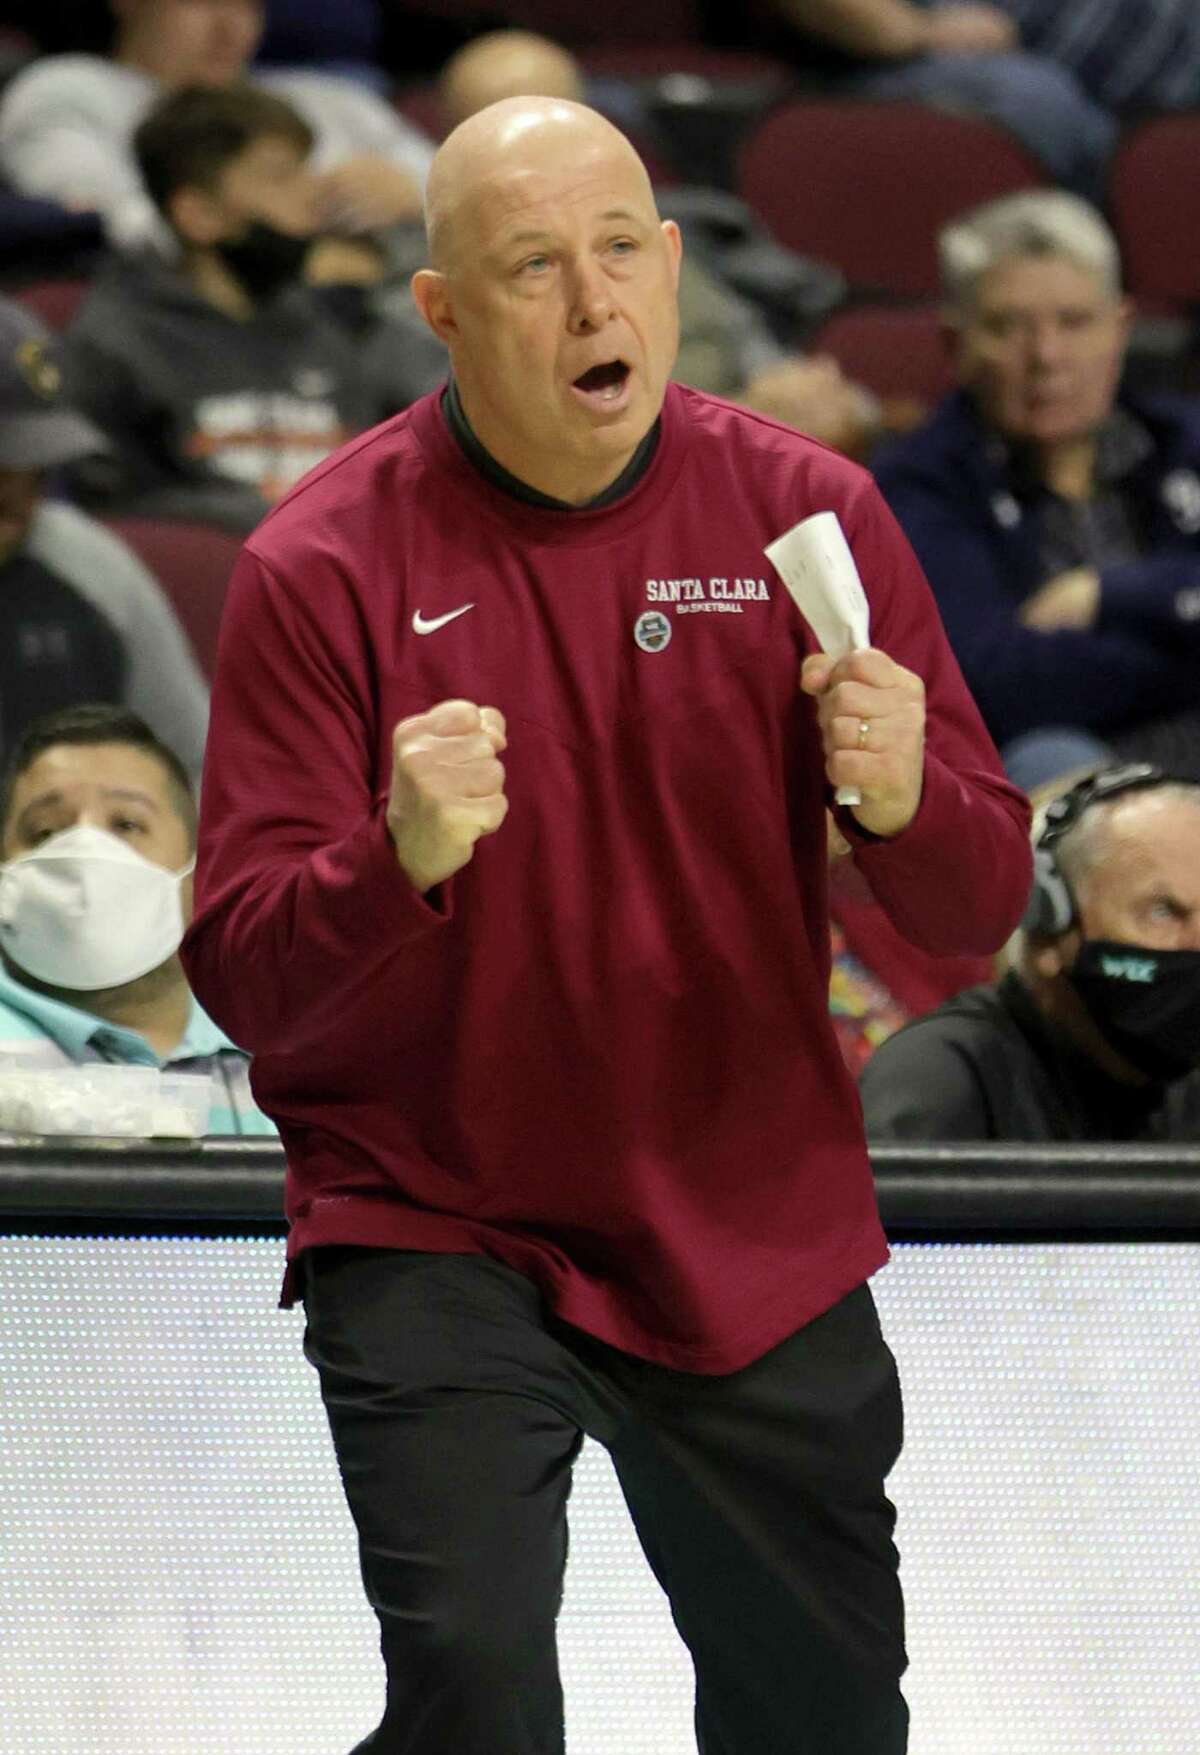 LAS VEGAS, NEVADA - MARCH 05: Head coach Herb Sendek of the Santa Clara Broncos reacts as his team takes on the Portland Pilots during the West Coast Conference basketball tournament quarterfinals at the Orleans Arena on March 05, 2022 in Las Vegas, Nevada. (Photo by Ethan Miller/Getty Images)